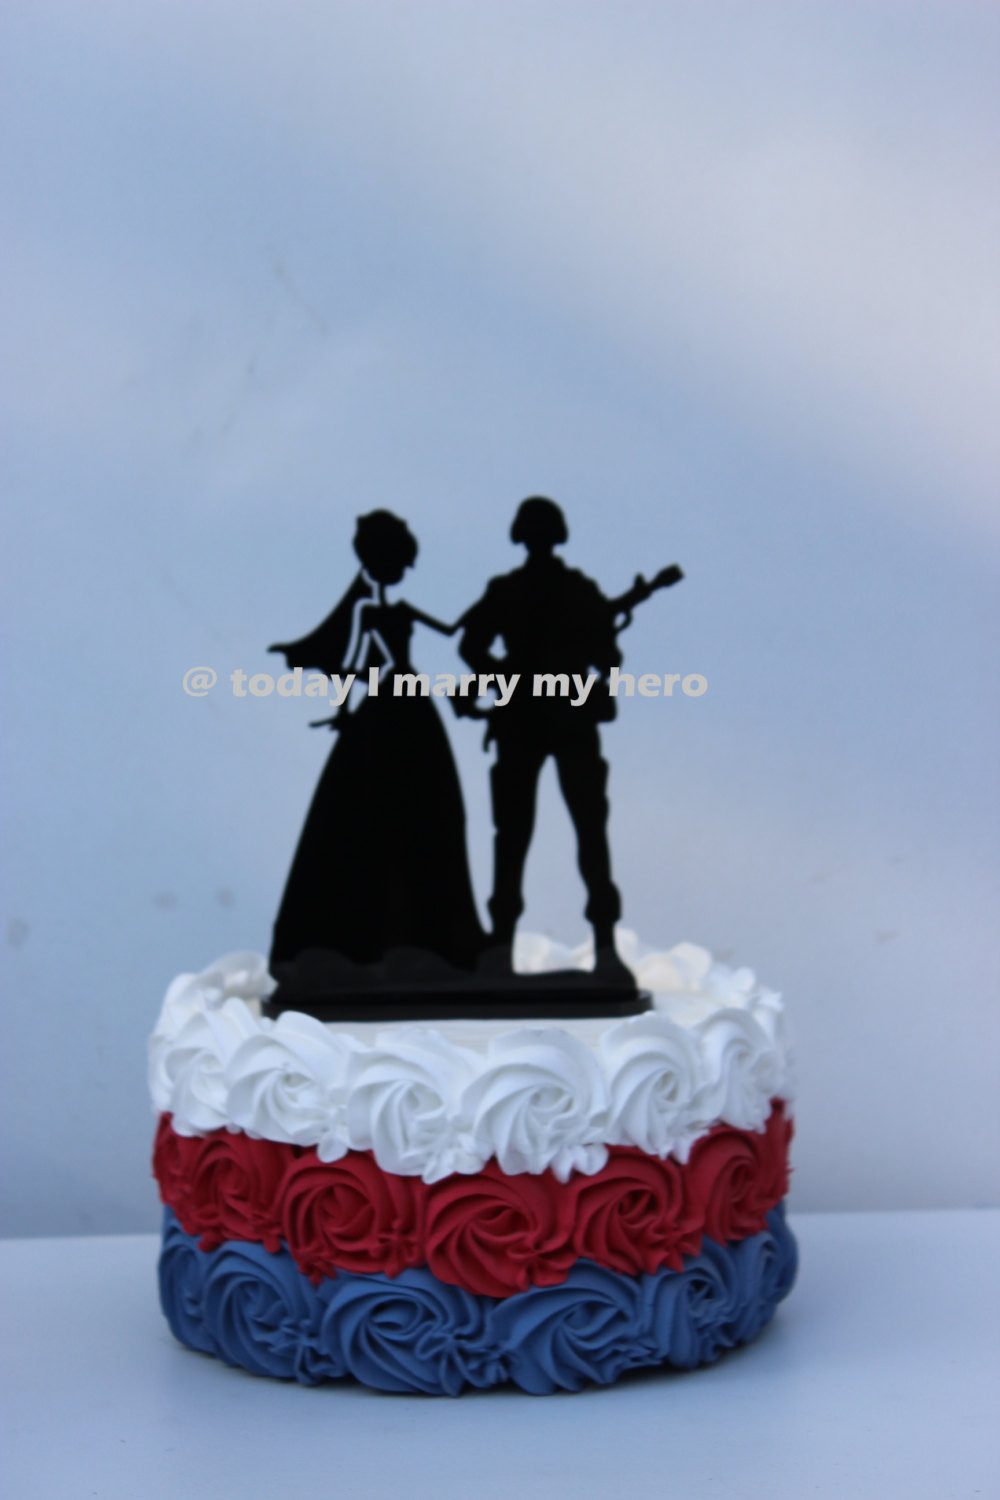 Military Wedding Cake Toppers Awesome Military Army Sol R Wedding Cake Topper Groom Gun Of Military Wedding Cake Toppers 